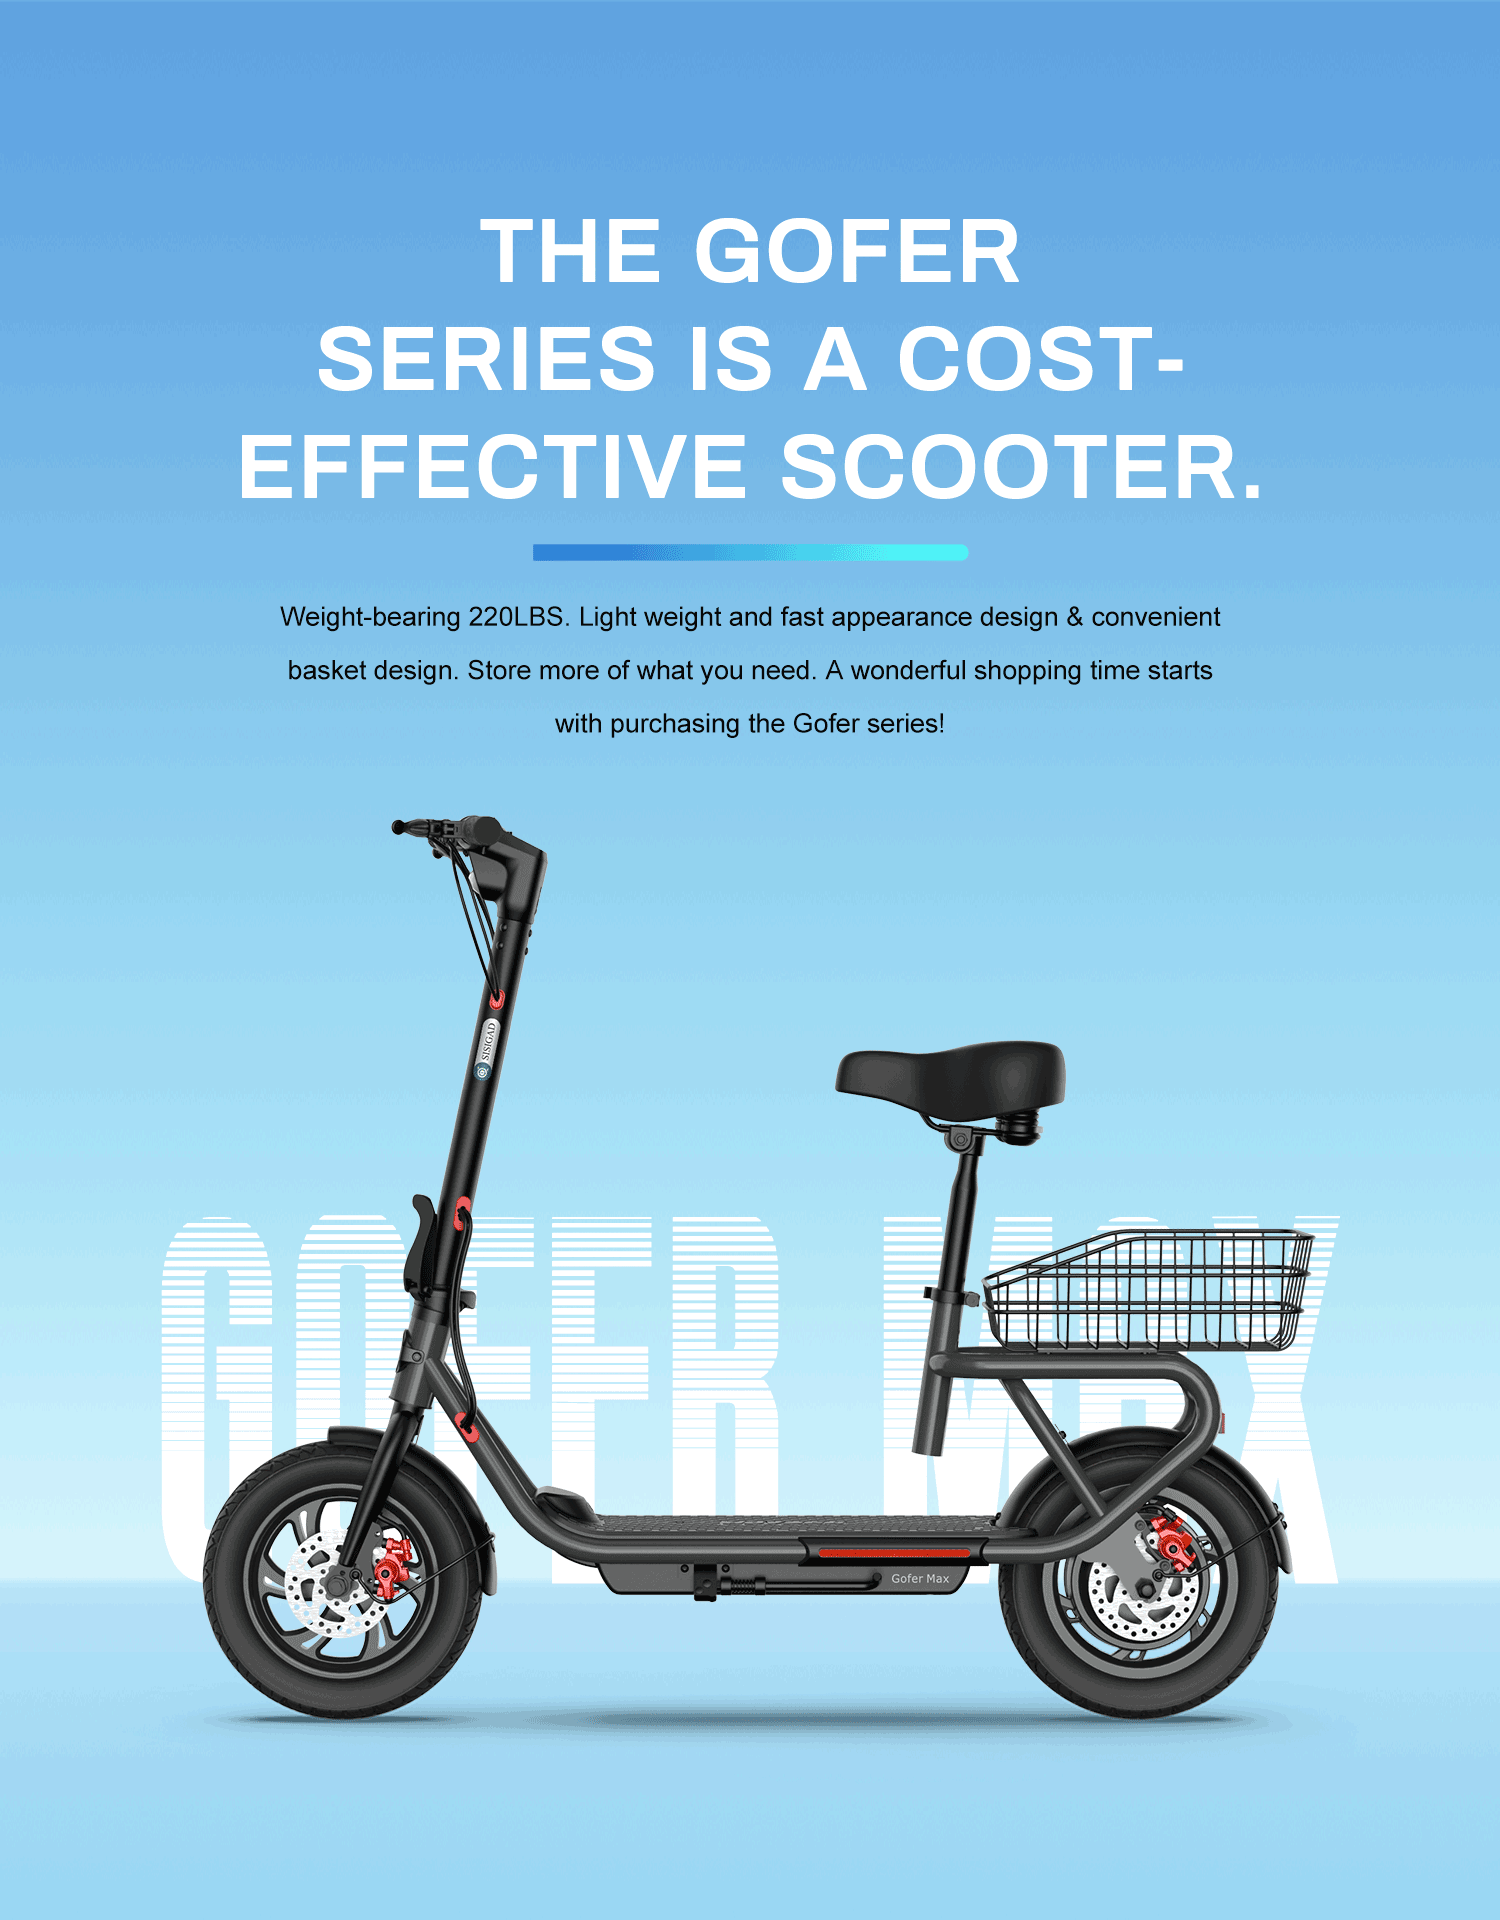 SISIGAD Gofer Max Electric Bike and SISIGAD Gofer Plus Electric Bike， your perfect shopping companion! Weight-bearing 220LBS. Light weight and fast appearance design & convenient basket design. Store of what you need. A wonderfl shopping time starts with purchasing in the Gofer series.